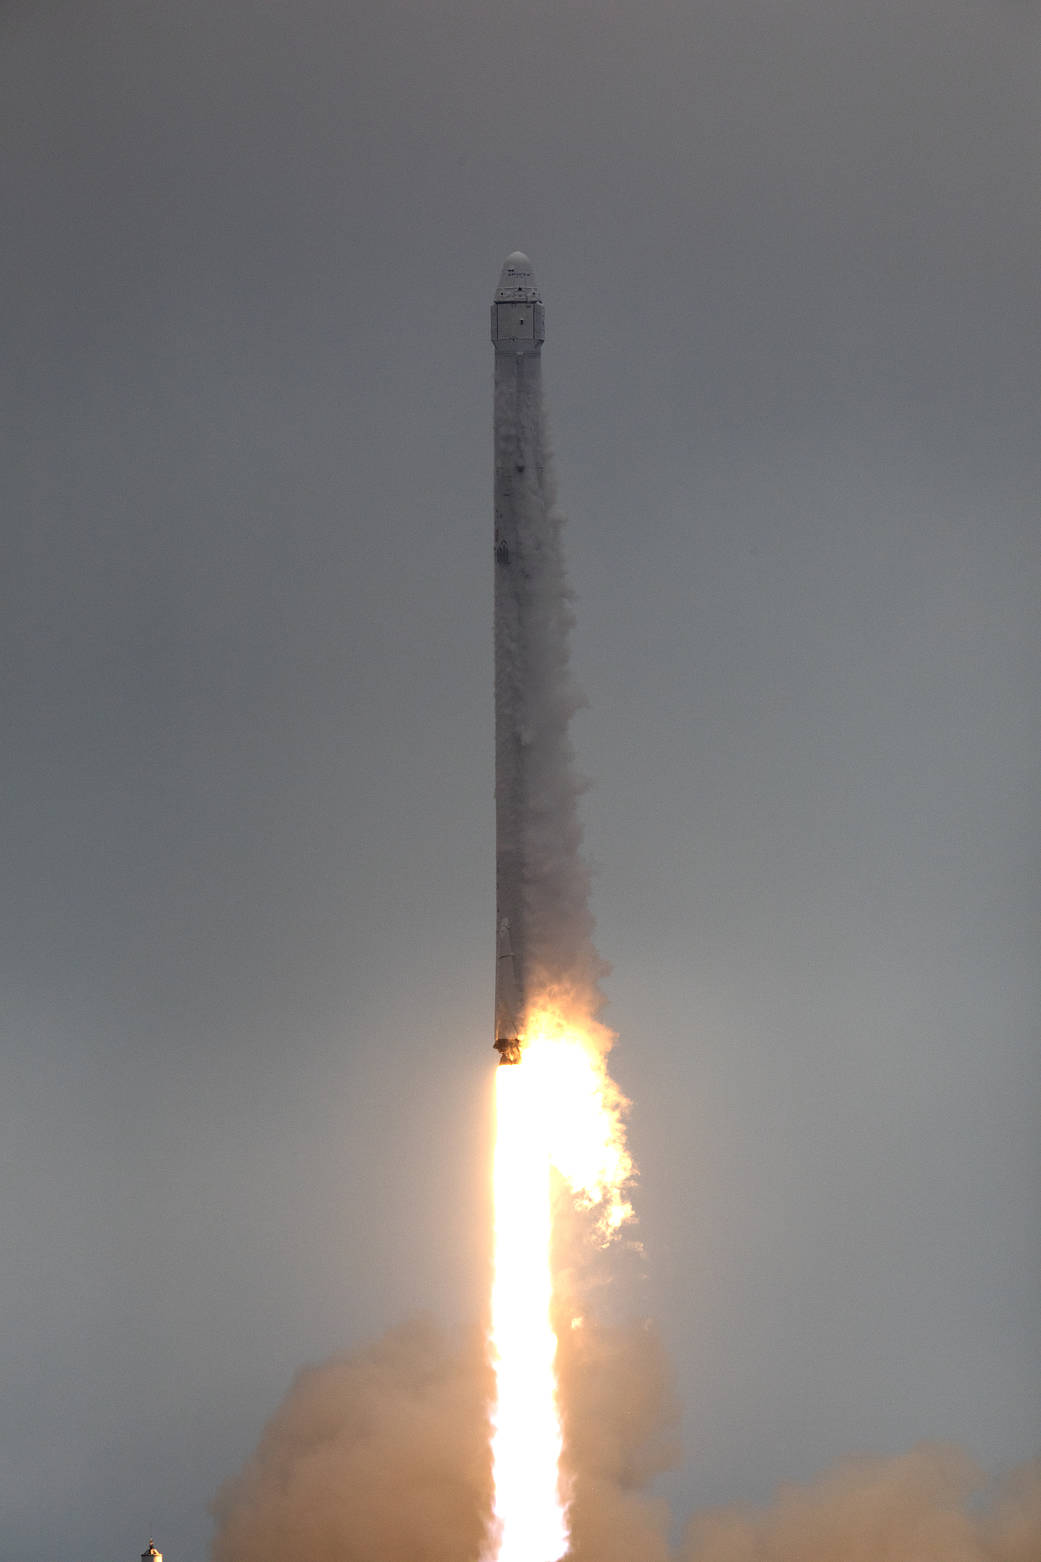 Liftoff of SpaceX Falcon 9 rocket with Dragon spacecraft